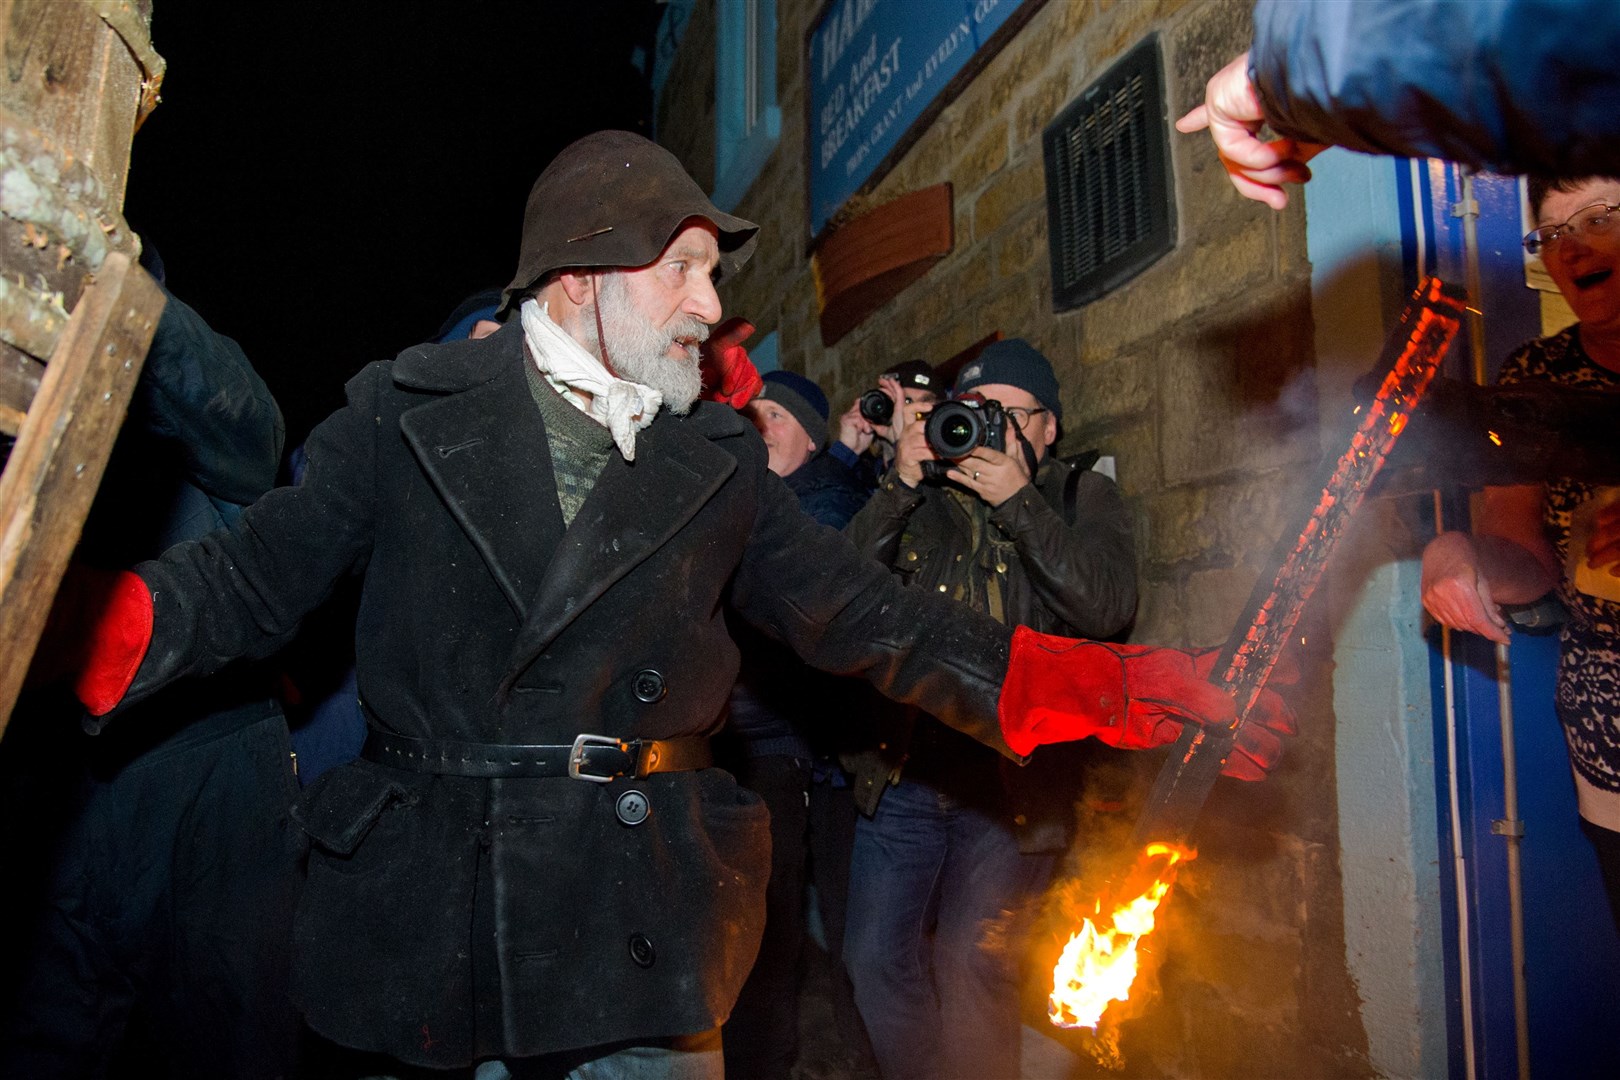 The village of Burghead welcome in the 2019 New Year on the 11th of January with their traditional Burning of the Clavie Celebration...Clavie King Dan Ralph hands out a burning stave to the Harbour Inn as a gift of good luck for the year ahead...Picture: Daniel Forsyth. Image No.042962.